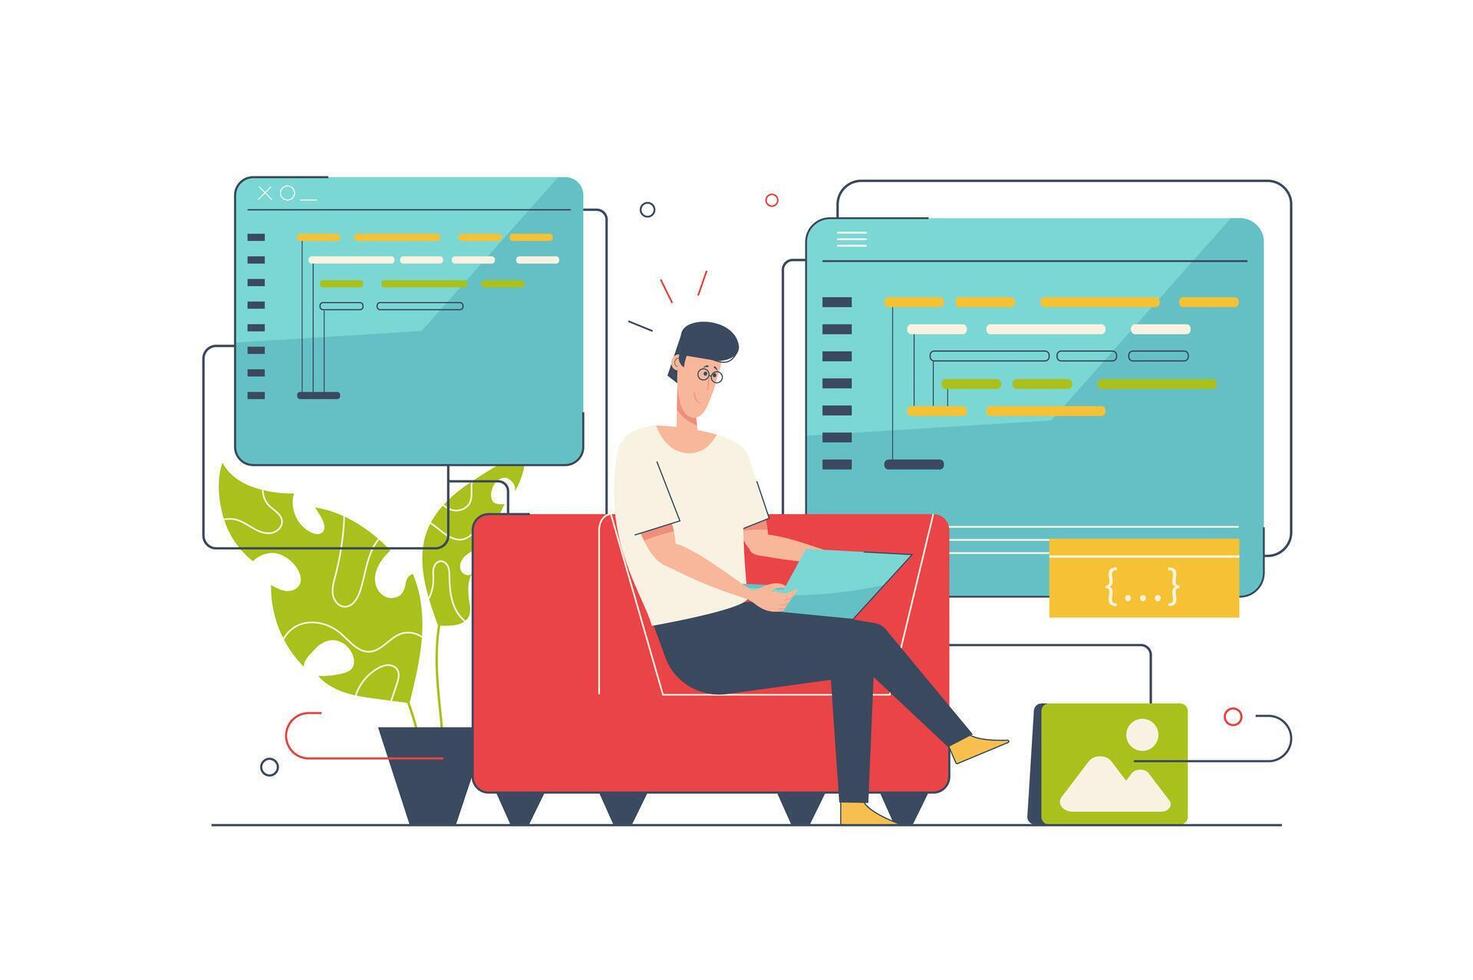 Programming software concept with people scene in flat cartoon design. Man developer creates programs and works with code, tests and optimizes. illustration with character situation for web vector